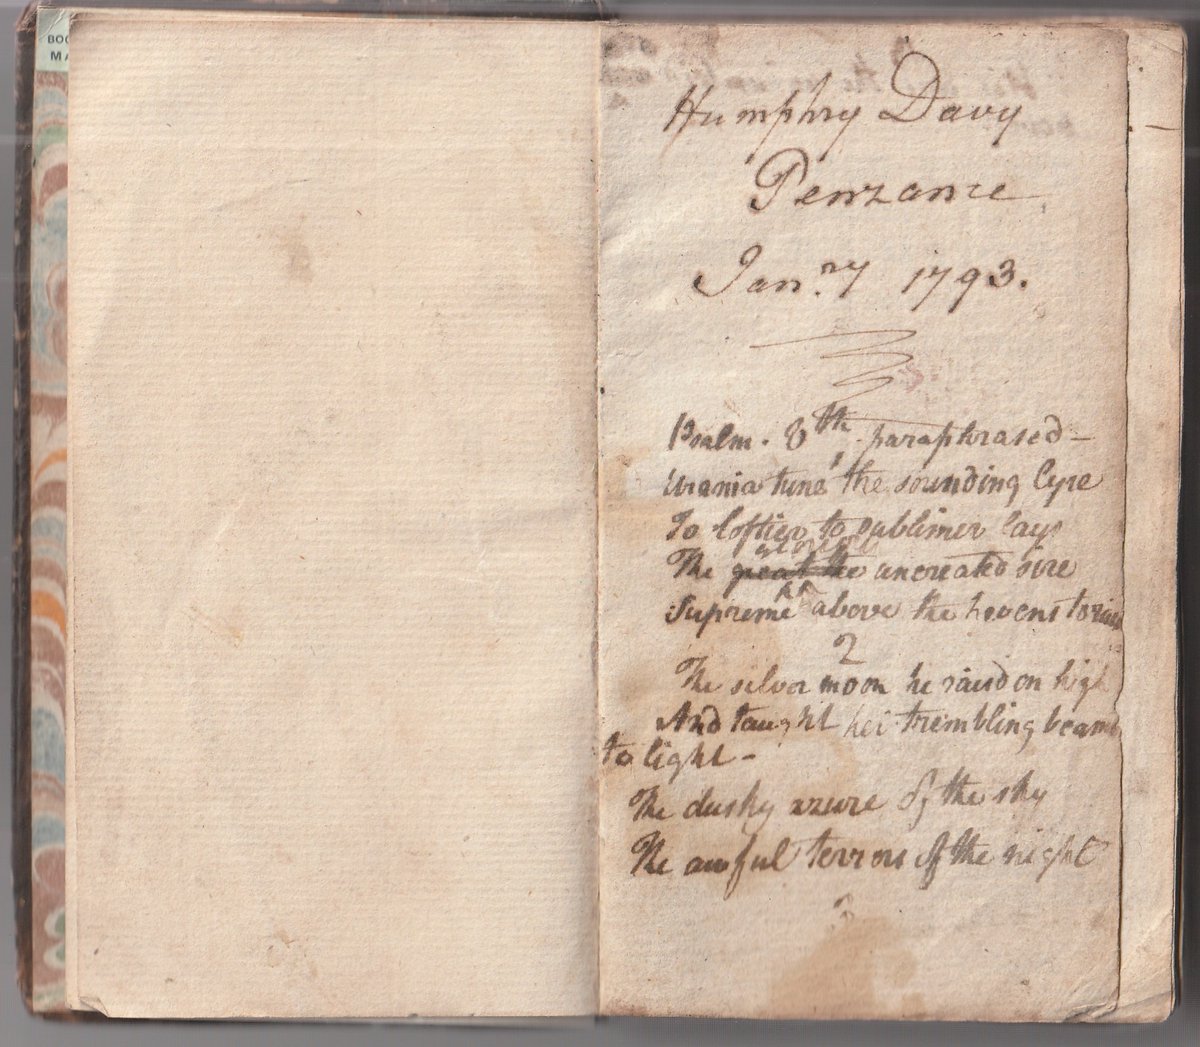 The Royal Society has recently acquired the Book of Common Prayer of chemist and Royal Society President Sir Humphry Davy, a gift from his early patron, the Penzance surgeon John Tonkin. @stsucl's Professor Frank James writes about it for @davynotebooks: wp.lancs.ac.uk/davynotebooks/…